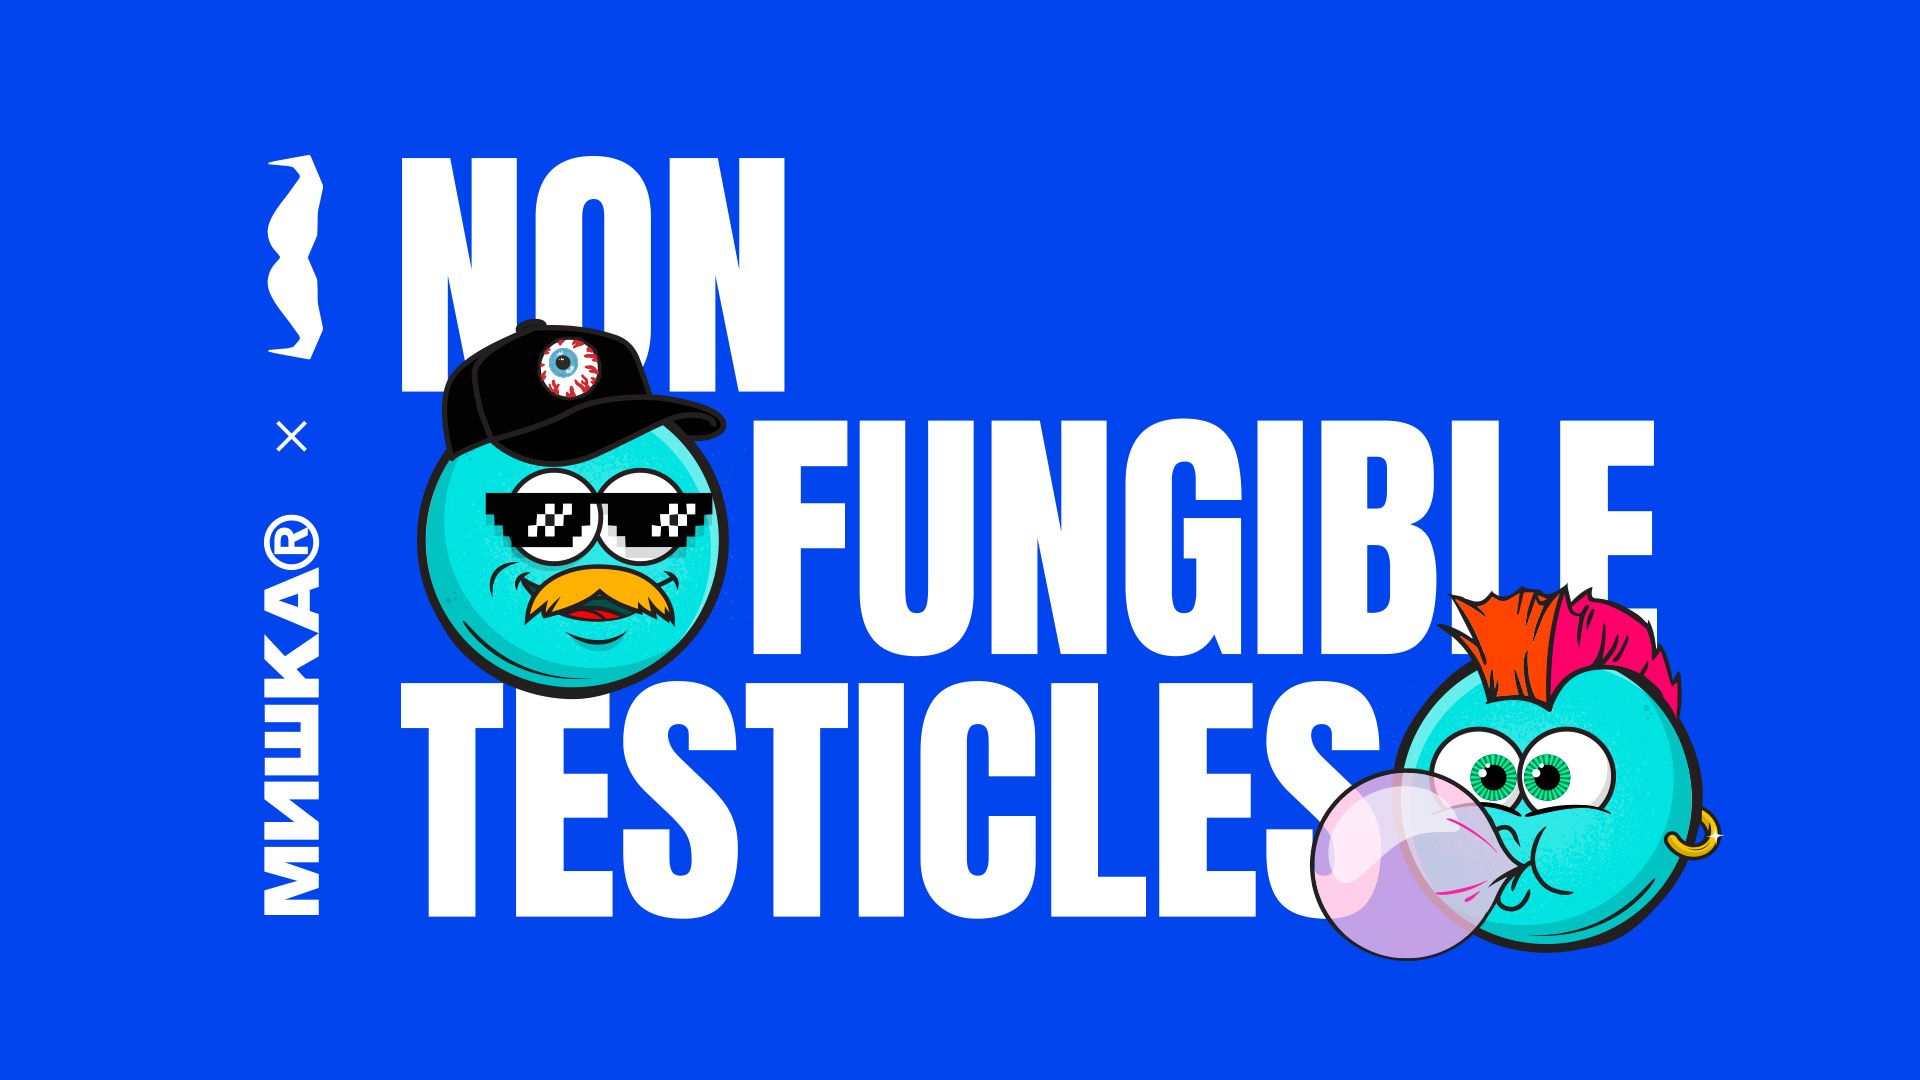 Graphic saying "NON FUNGIBLE TESTICLES" featuring two anthropomorphised cartoon-like balls with cheerful human faces. 